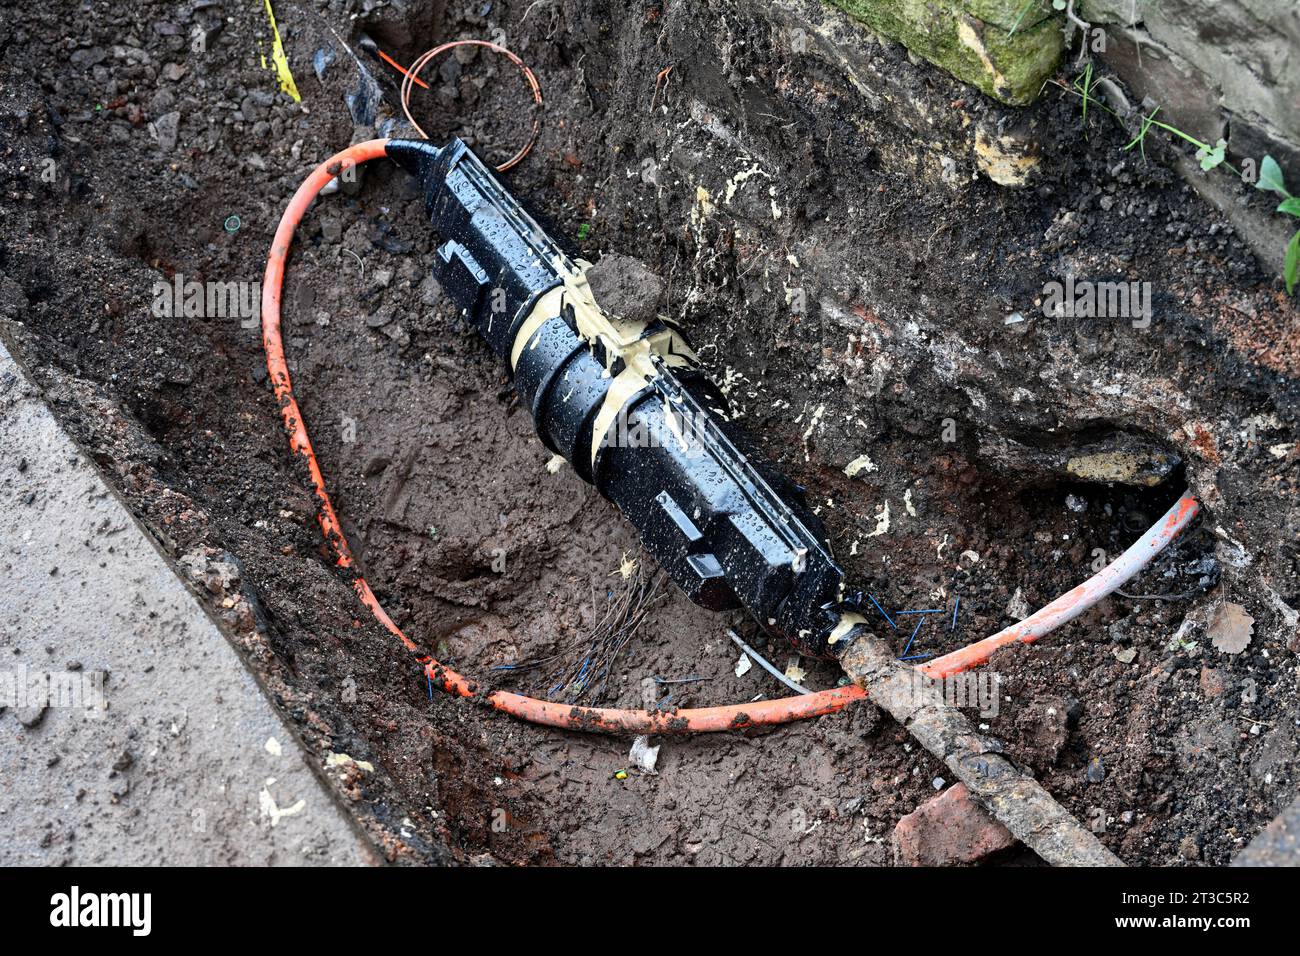 https://www.alamy.com/stock-photo-underground-mains-power-cable-exposed-for-refurbishment-in-hole-dug-175407310.html?imageid=3A58036C-49BE-4B57-84E5-1 Stock Photo